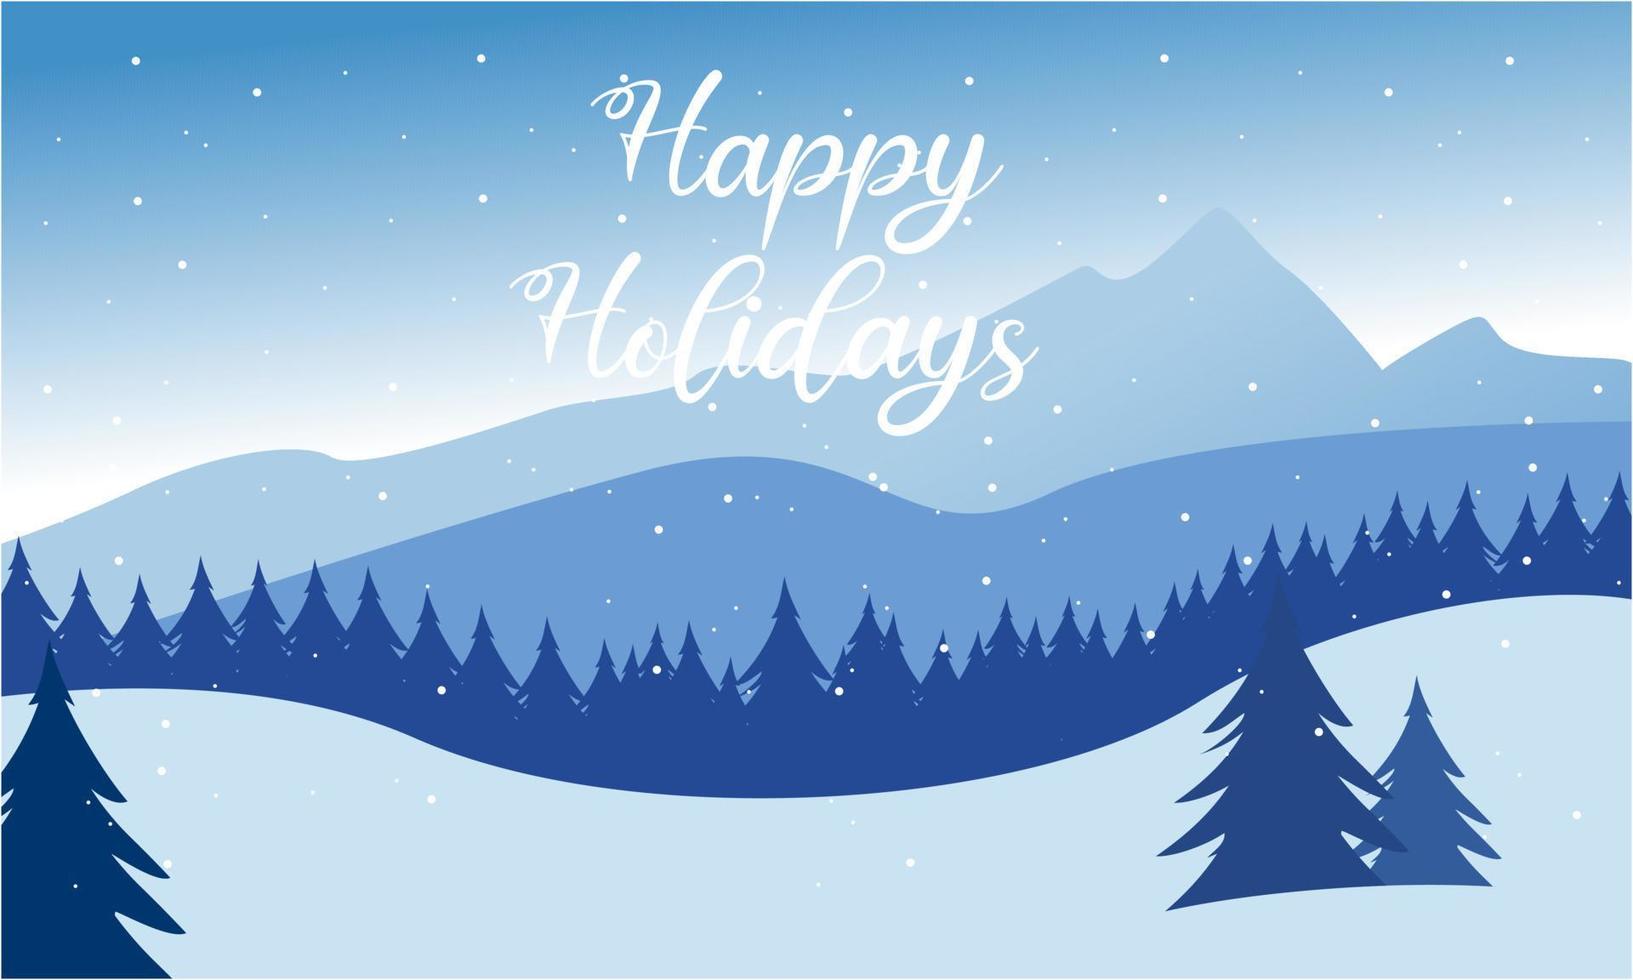 Blue mountains winter snowy landscape with hand lettering of Happy Holidays and pines on foreground illustration vector